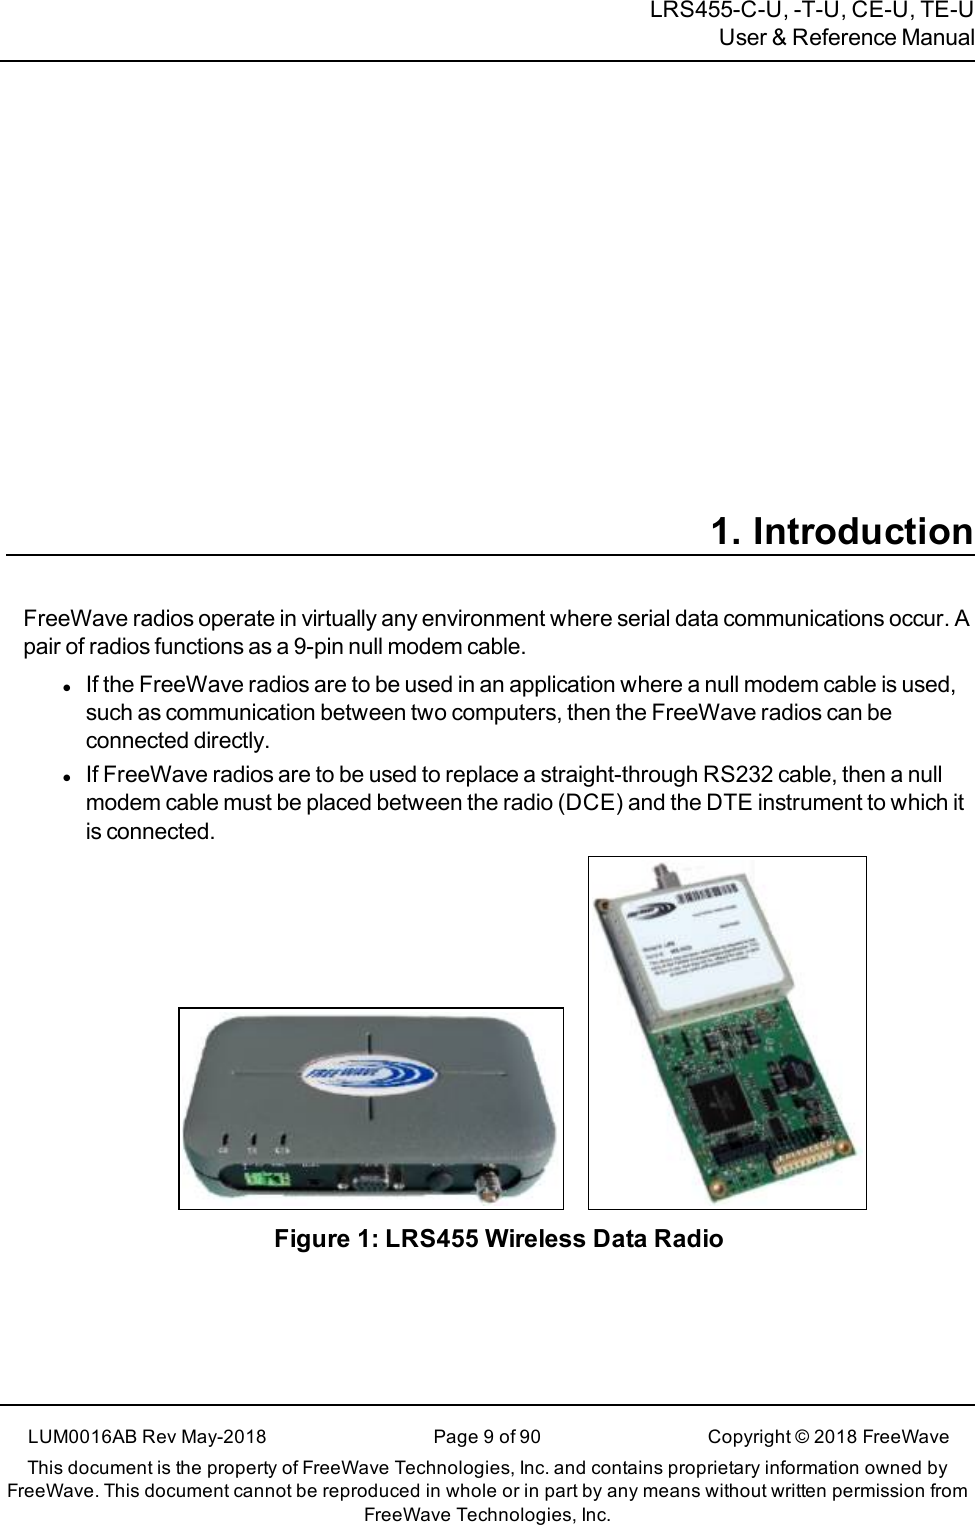 LRS455-C-U, -T-U, CE-U, TE-UUser &amp; Reference Manual1. IntroductionFreeWave radios operate in virtually any environment where serial data communications occur. Apair of radios functions as a 9-pin null modem cable.lIf the FreeWave radios are to be used in an application where a null modem cable is used,such as communication between two computers, then the FreeWave radios can beconnected directly.lIf FreeWave radios are to be used to replace a straight-through RS232 cable, then a nullmodem cable must be placed between the radio (DCE) and the DTE instrument to which itis connected.Figure 1: LRS455 Wireless Data RadioLUM0016AB Rev May-2018 Page 9 of 90 Copyright © 2018FreeWaveThis document is the property of FreeWave Technologies, Inc. and contains proprietary information owned byFreeWave. This document cannot be reproduced in whole or in part by any means without written permission fromFreeWave Technologies, Inc.